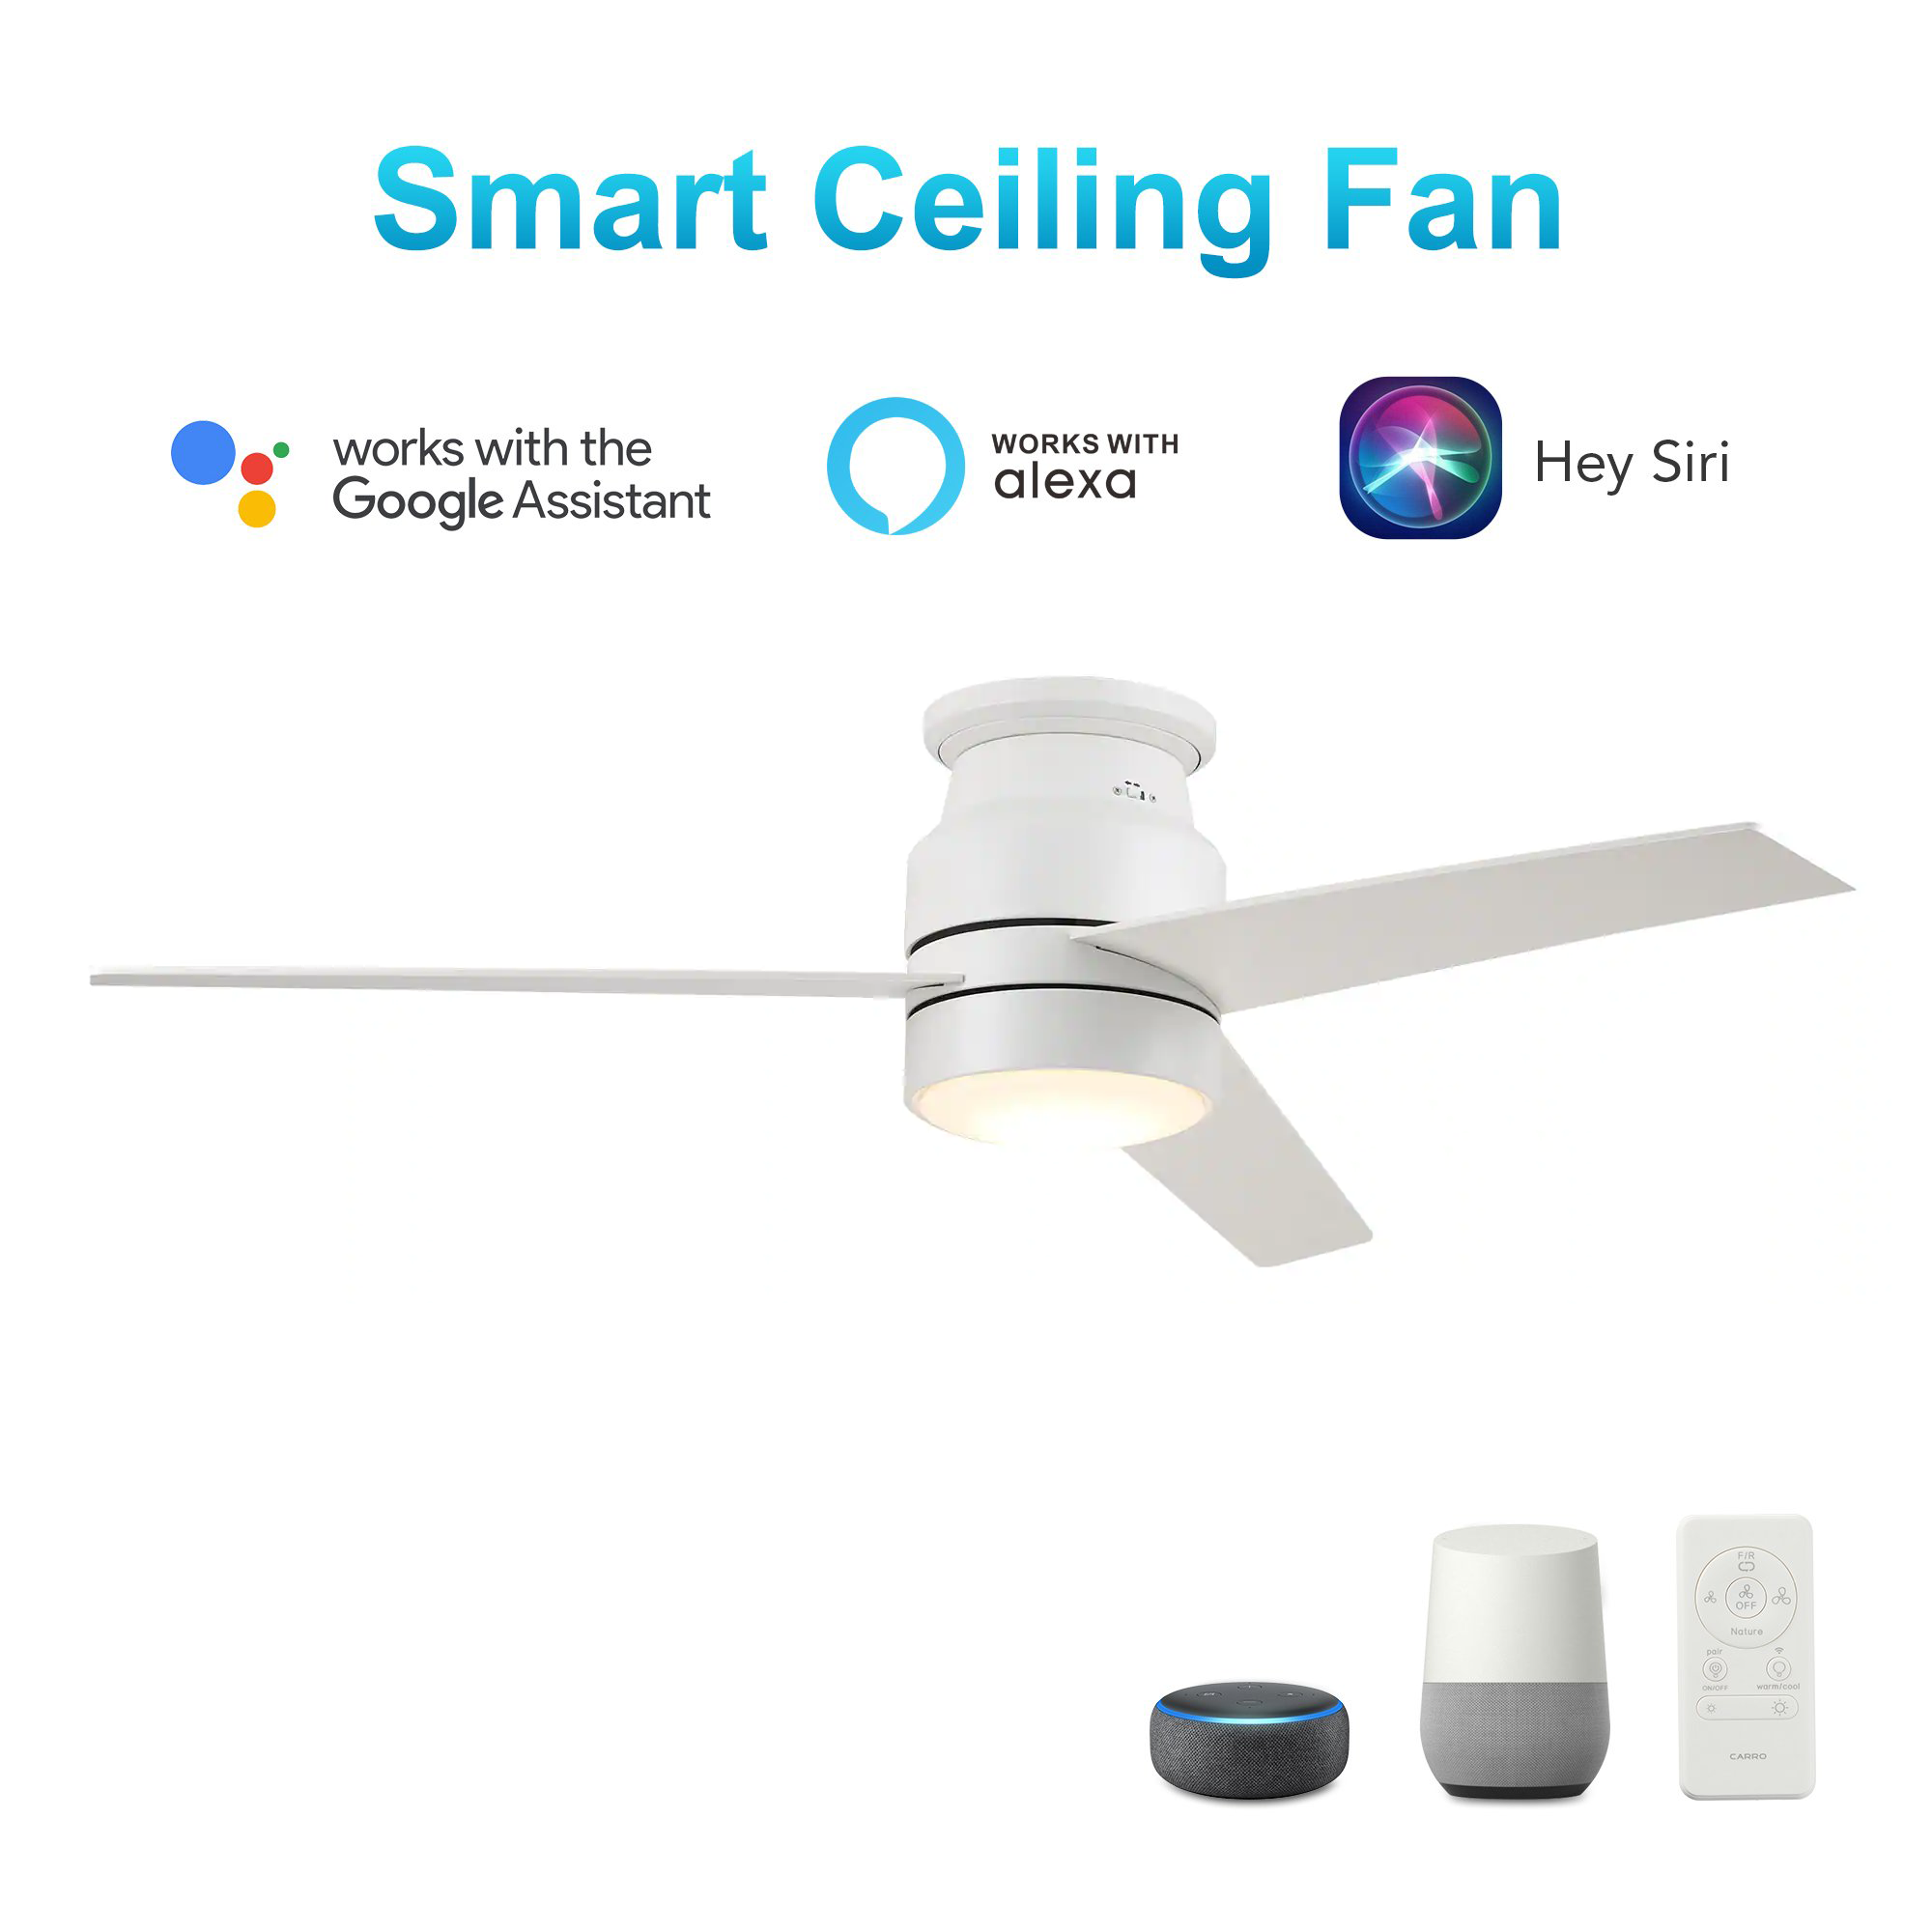 Ranger 52" In. White/White 3 Blade Smart Ceiling Fan with LED Light Kit Works with Wall control, Wi-Fi apps and Voice control via Google Assistant/Alexa/Siri